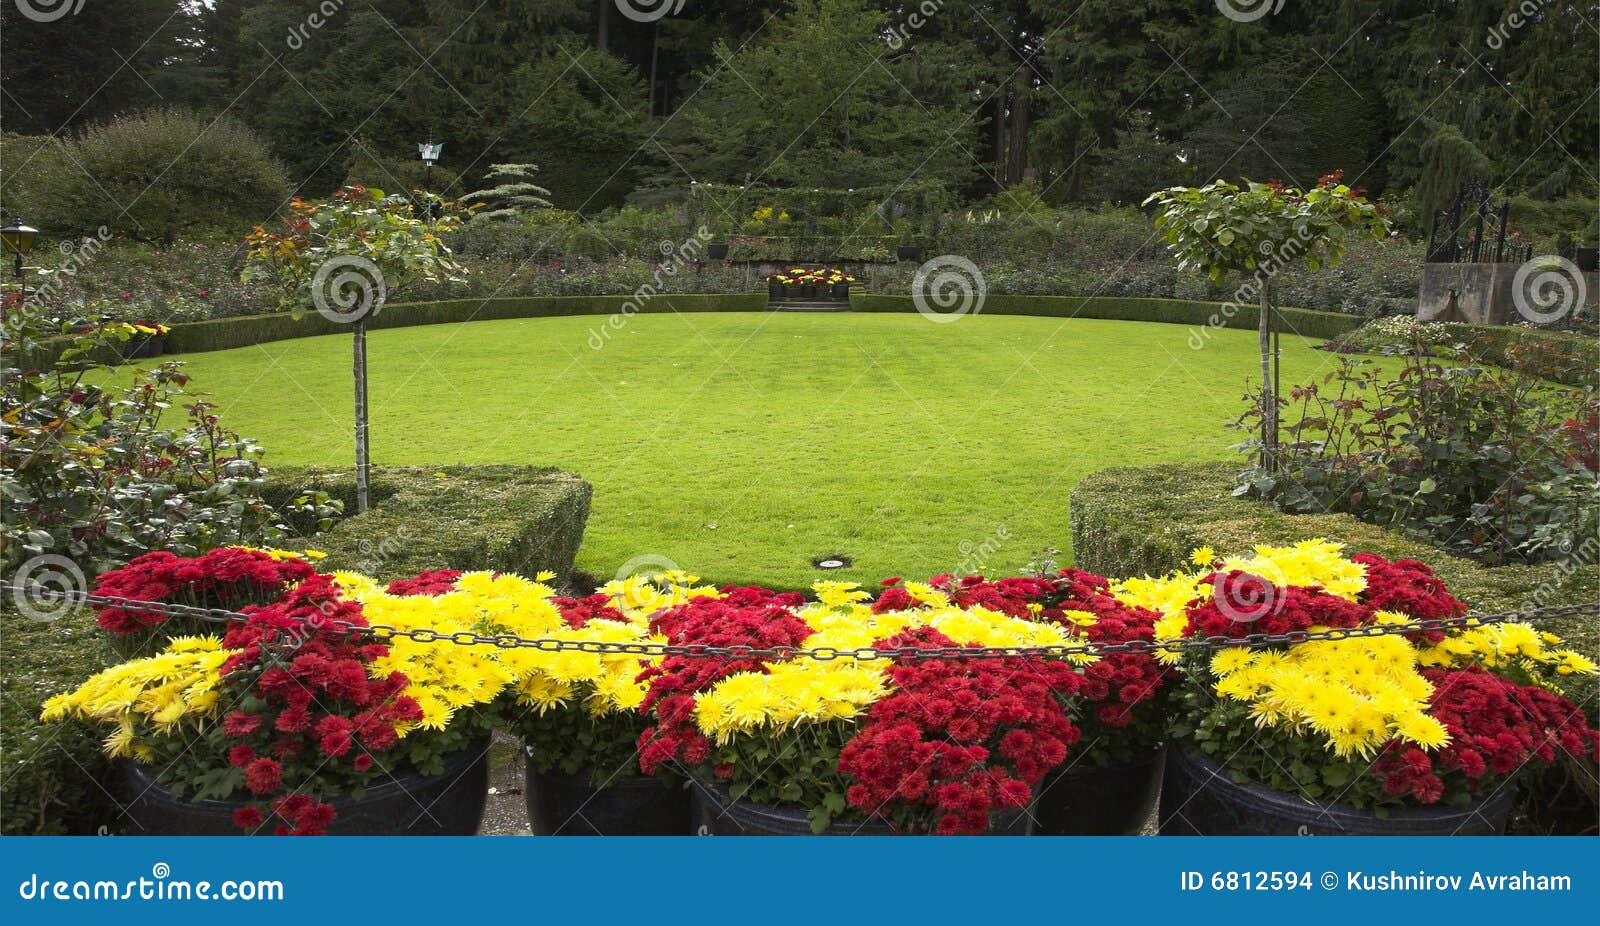 Scarecrow In English Garden Stock Image - Image of 